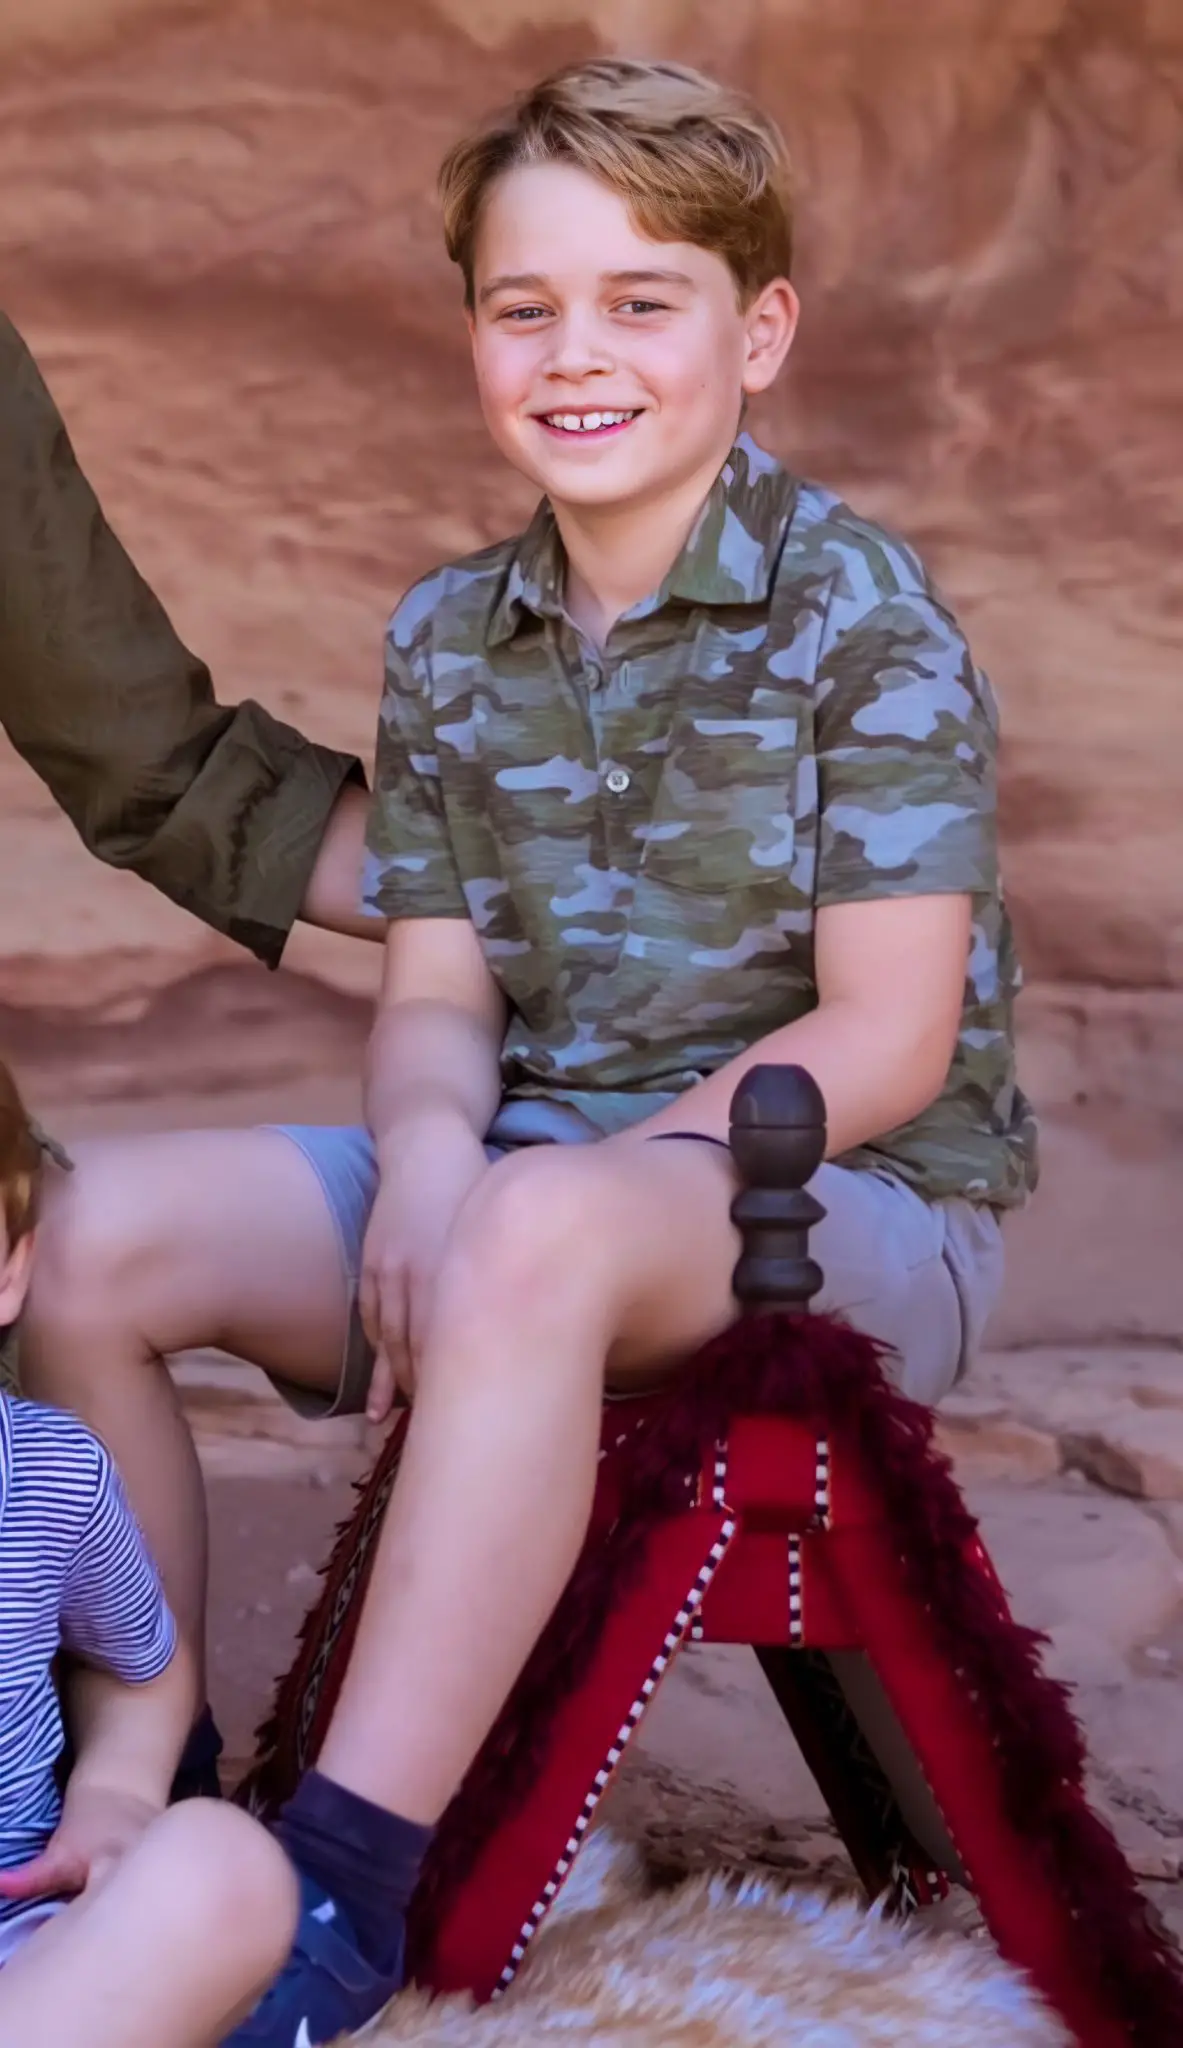 he little future King, Prince George was wearing a £14.95 camo t-shirt from GAP and grey shorts.